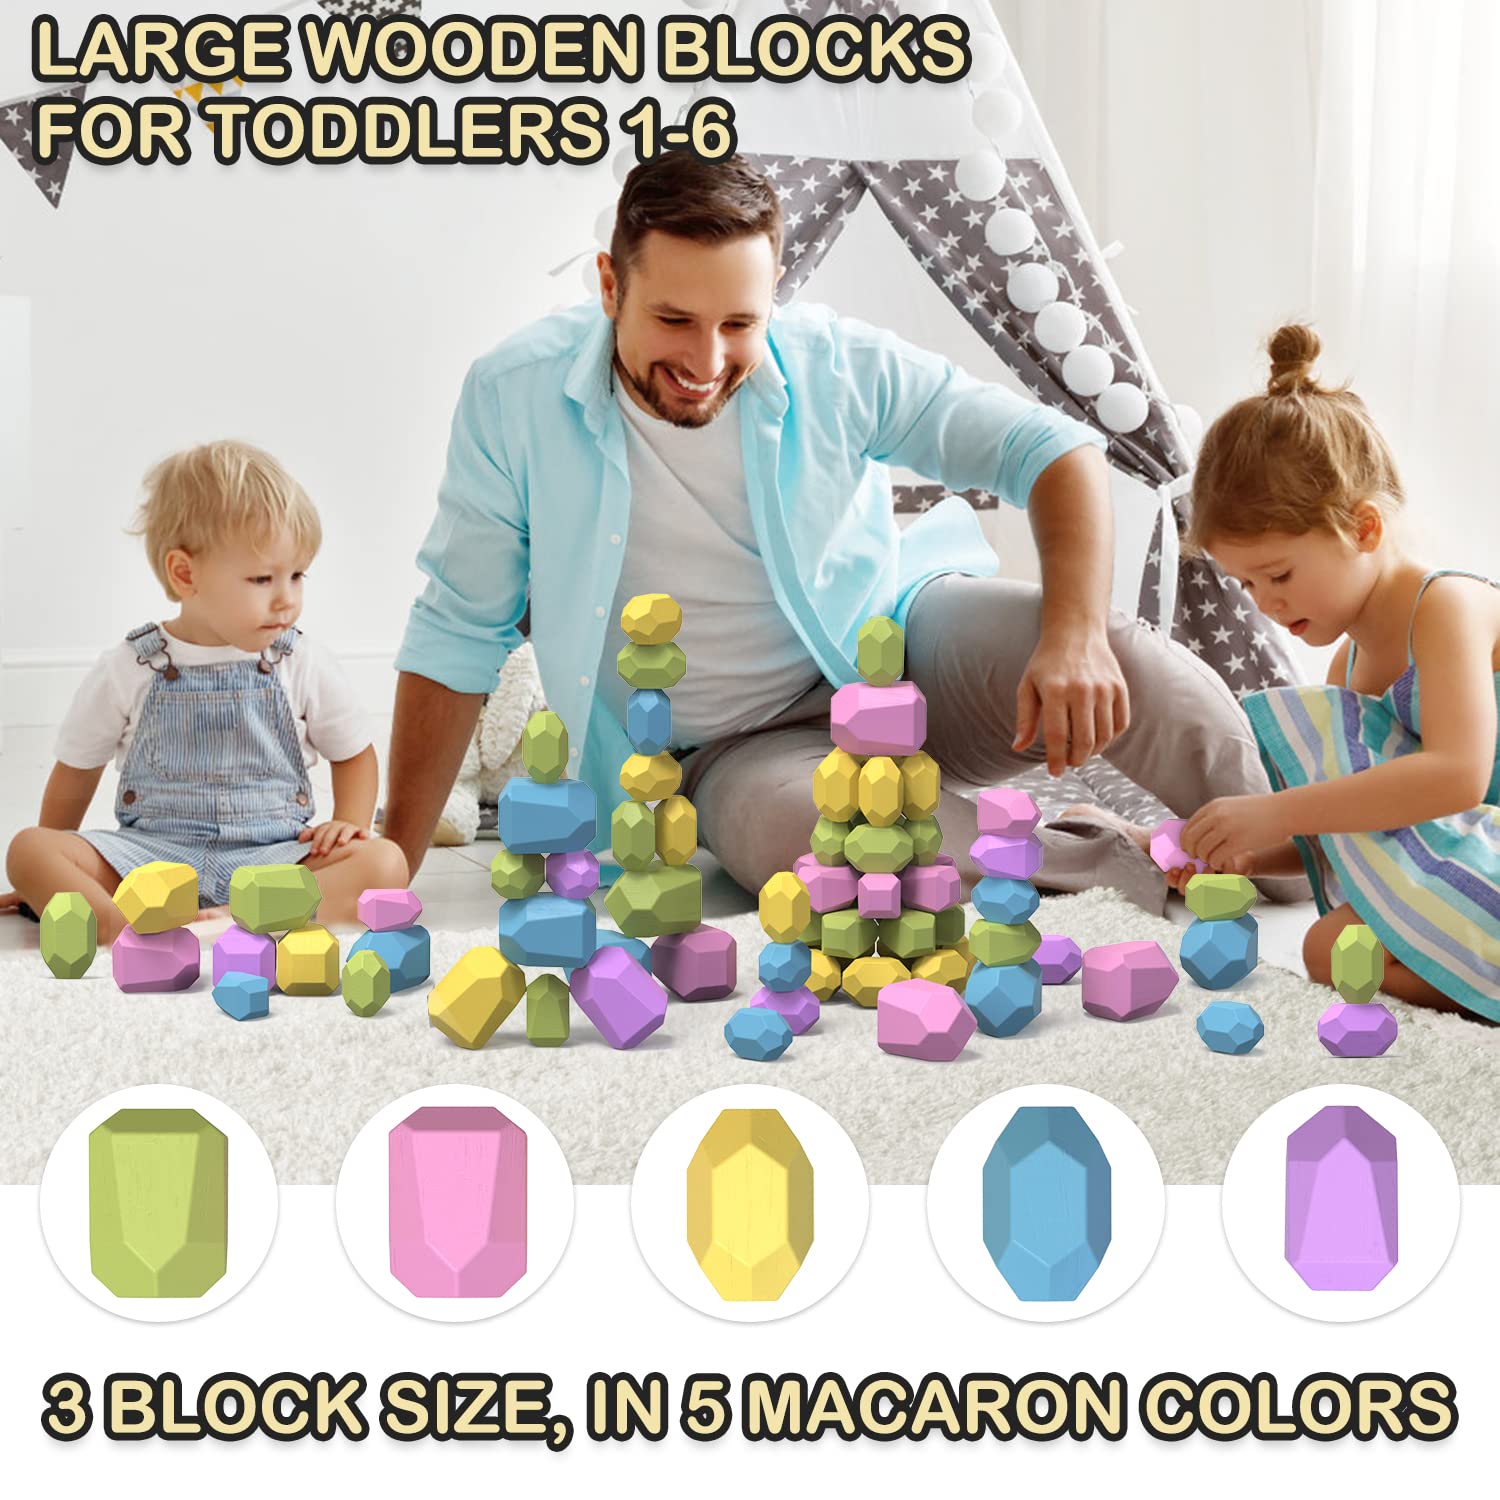 Sensory Toys for 1 2 3 Year Old Boys Girls, Wooden Stacking Blocks Rocks, Montessori Stacking Toys for Toddlers 1-3, Educational Learning Building Blocks Toddler Toys for Kids Age 3-5, Preschool Gift